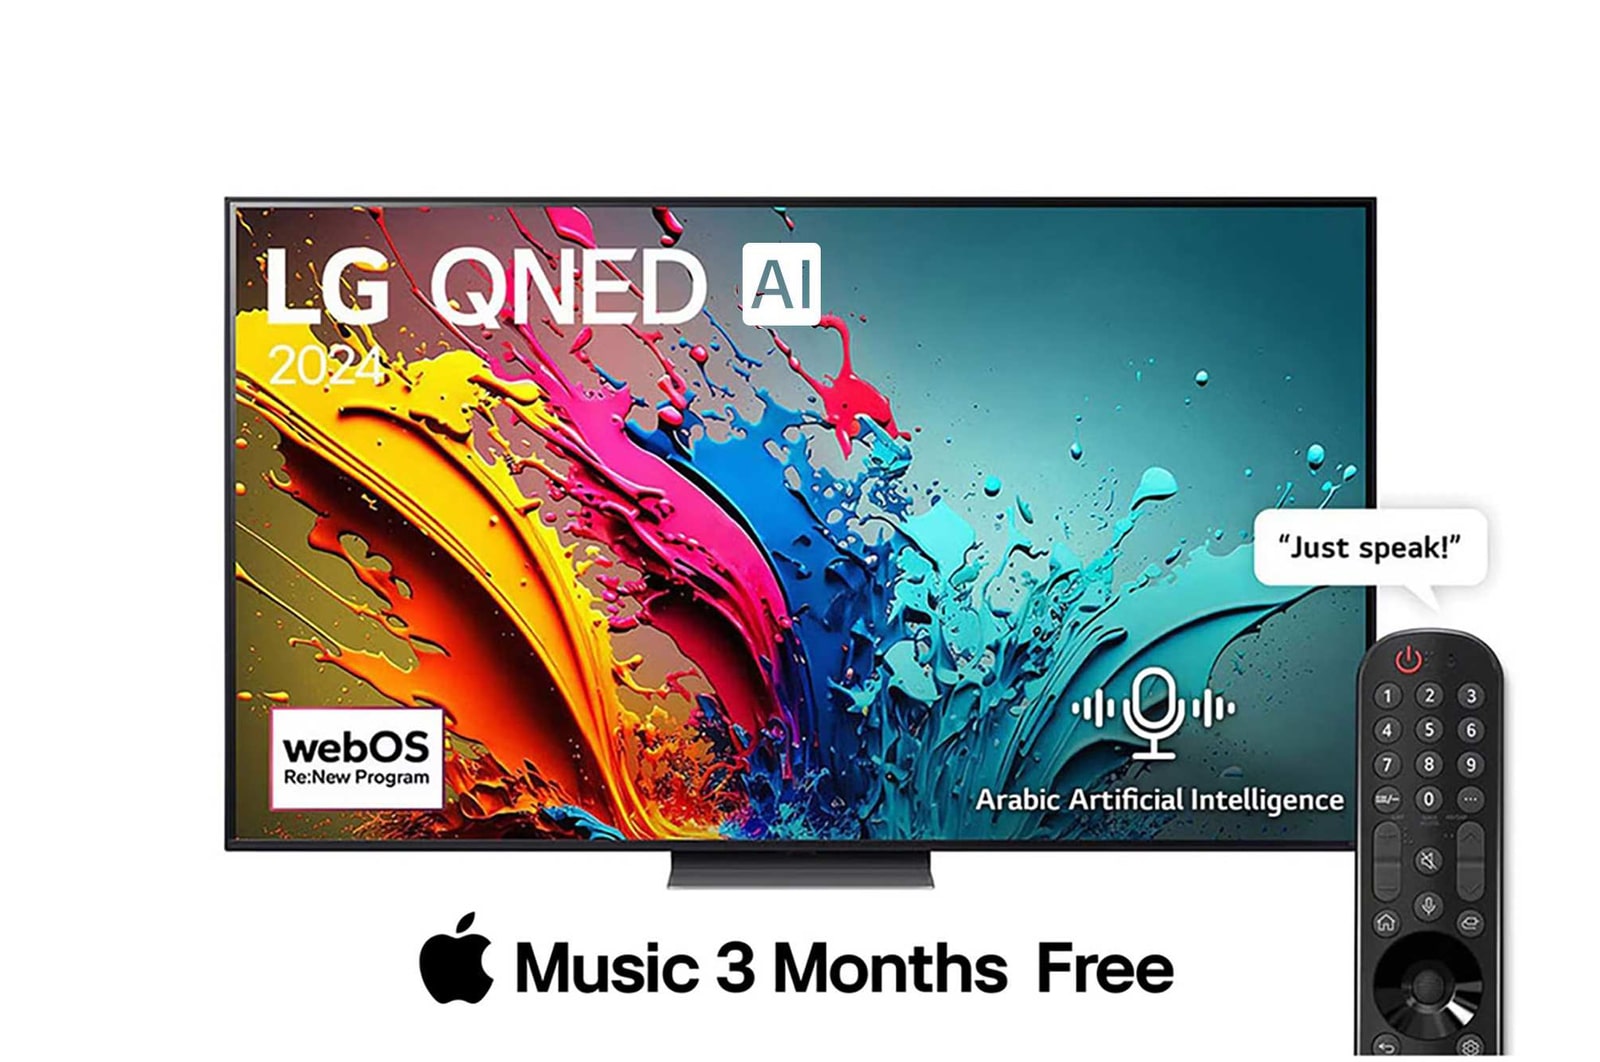 Front view of LG QNED TV, QNED86 with text of LG QNED, 2024, and webOS Re:New Program logo on screen